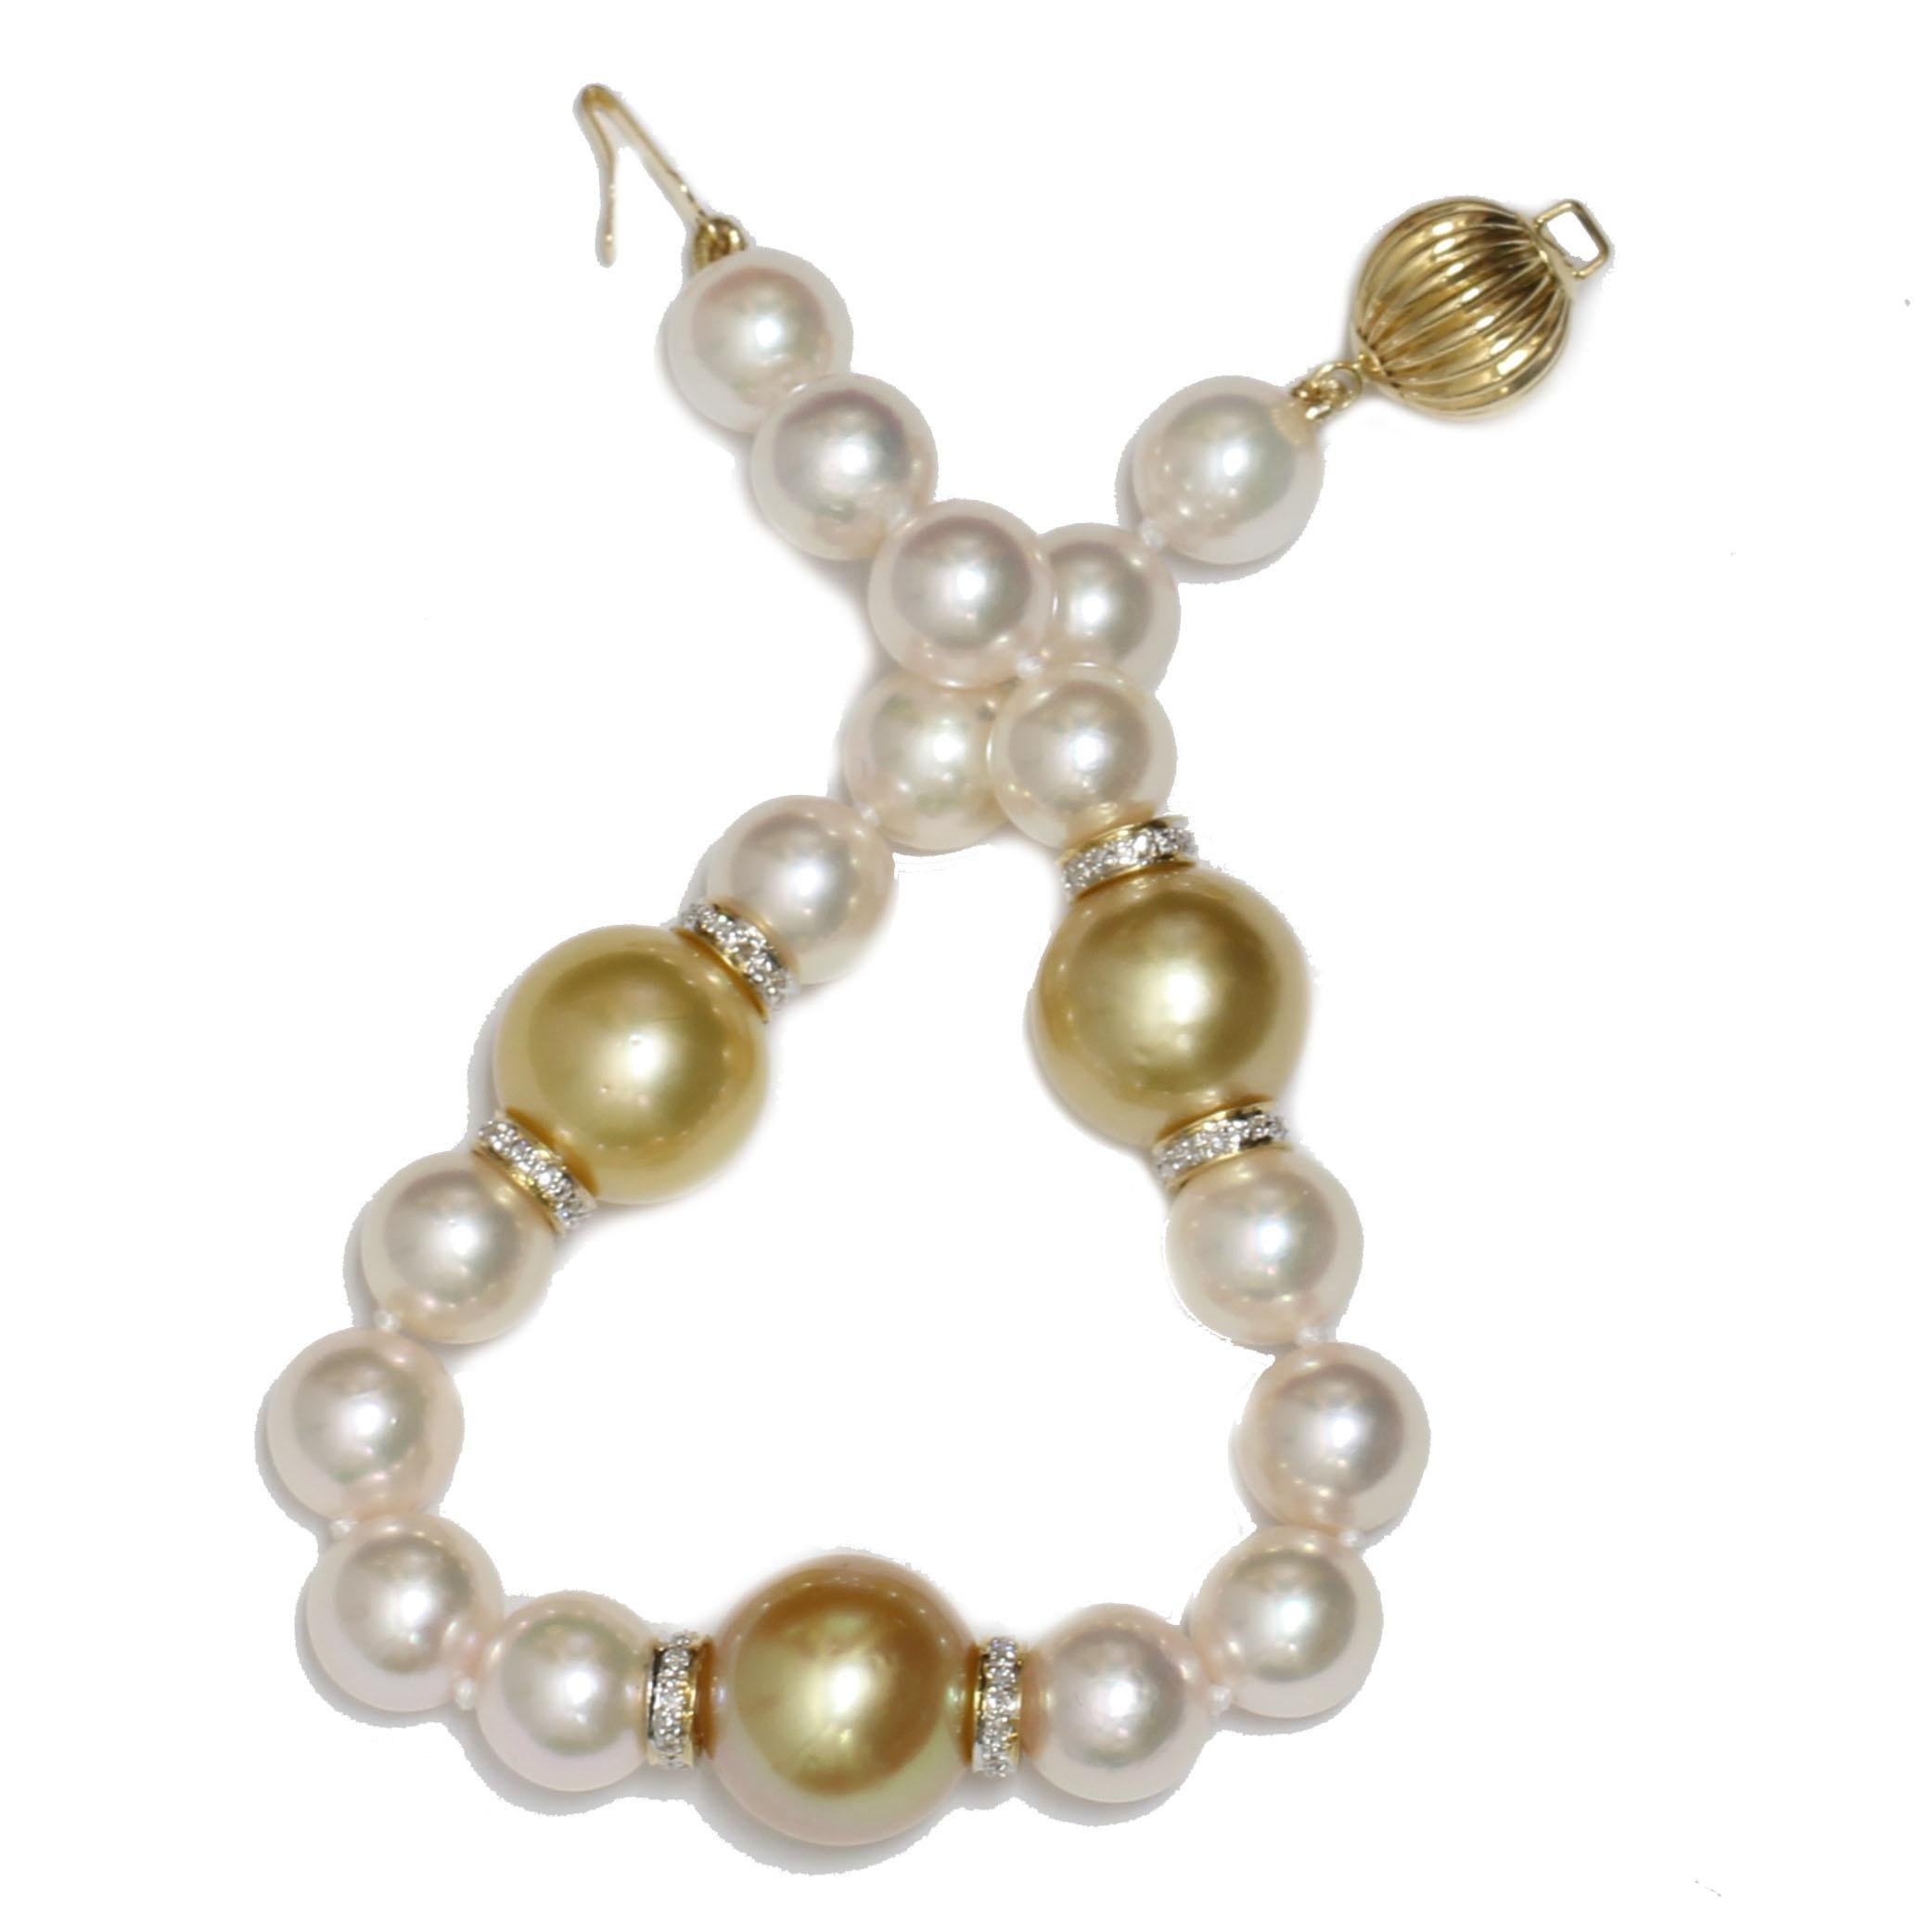 Origin: 	Australia & Japan
Pearl Type: South Sea  & Japanese Pearls
Pearl Size: 11.0 - 11.5mm South Sea Pearls
                  7.5 - 8mm Akoya Pearls
Pearl Color: Natural Golden and white
Pearl Shape: Round
Pearl Surface: AAA
Pearl Luster: AAA